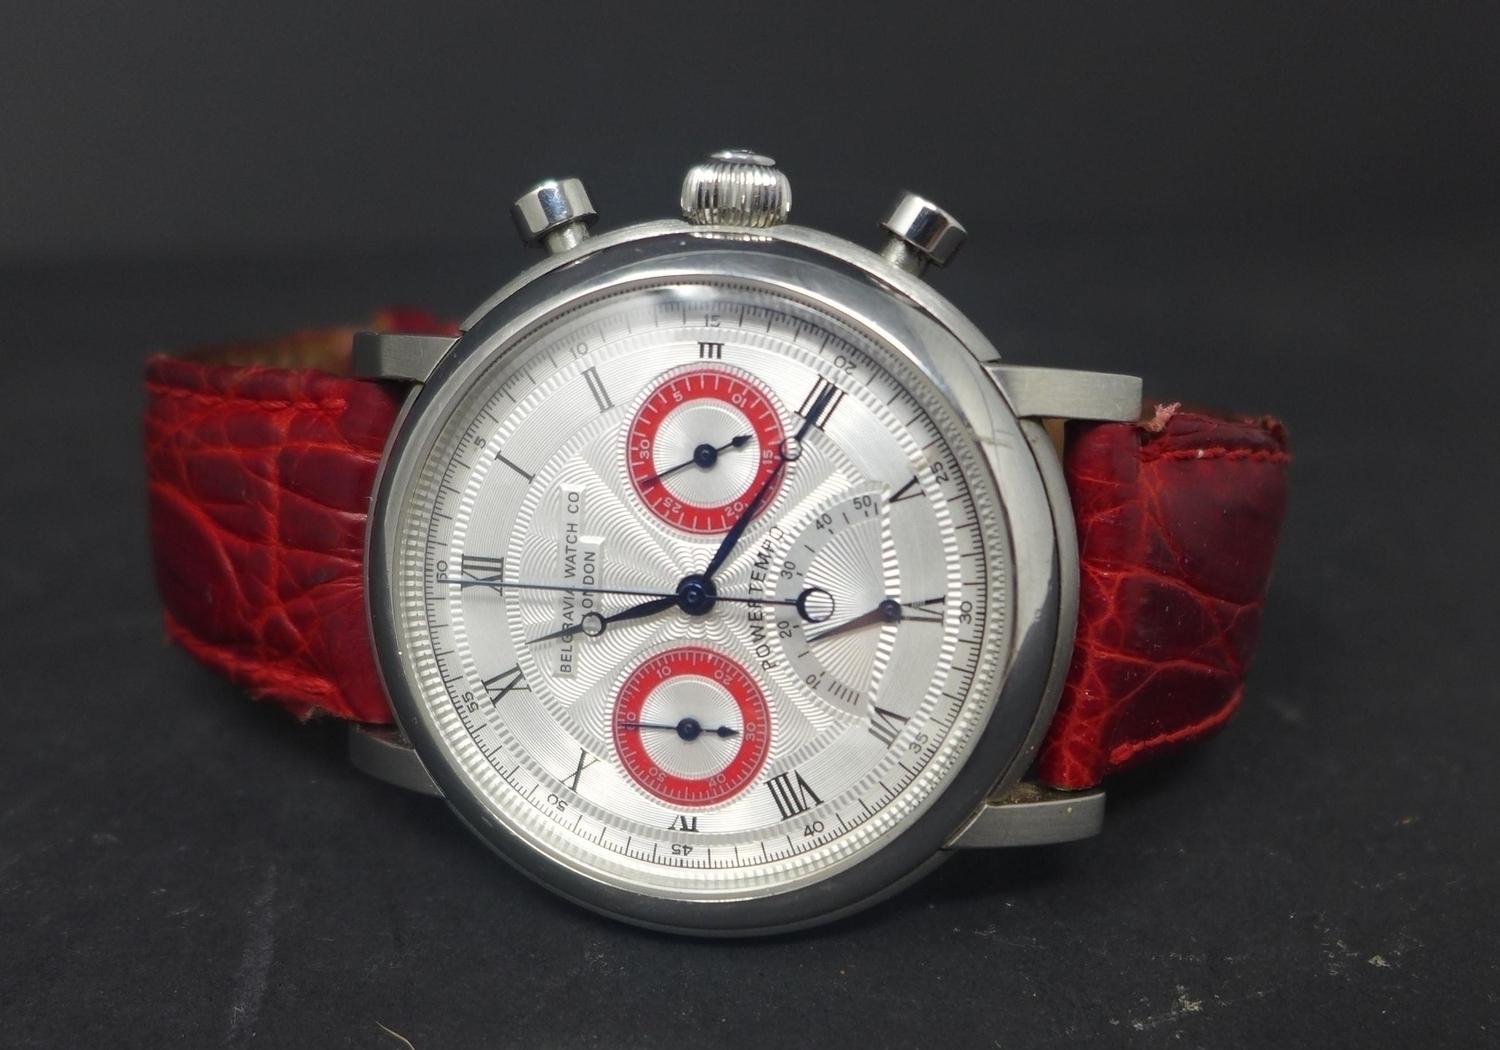 A Belgravia Watch Co. limited edition gentleman's Power Tempo chronograph wristwatch, reference